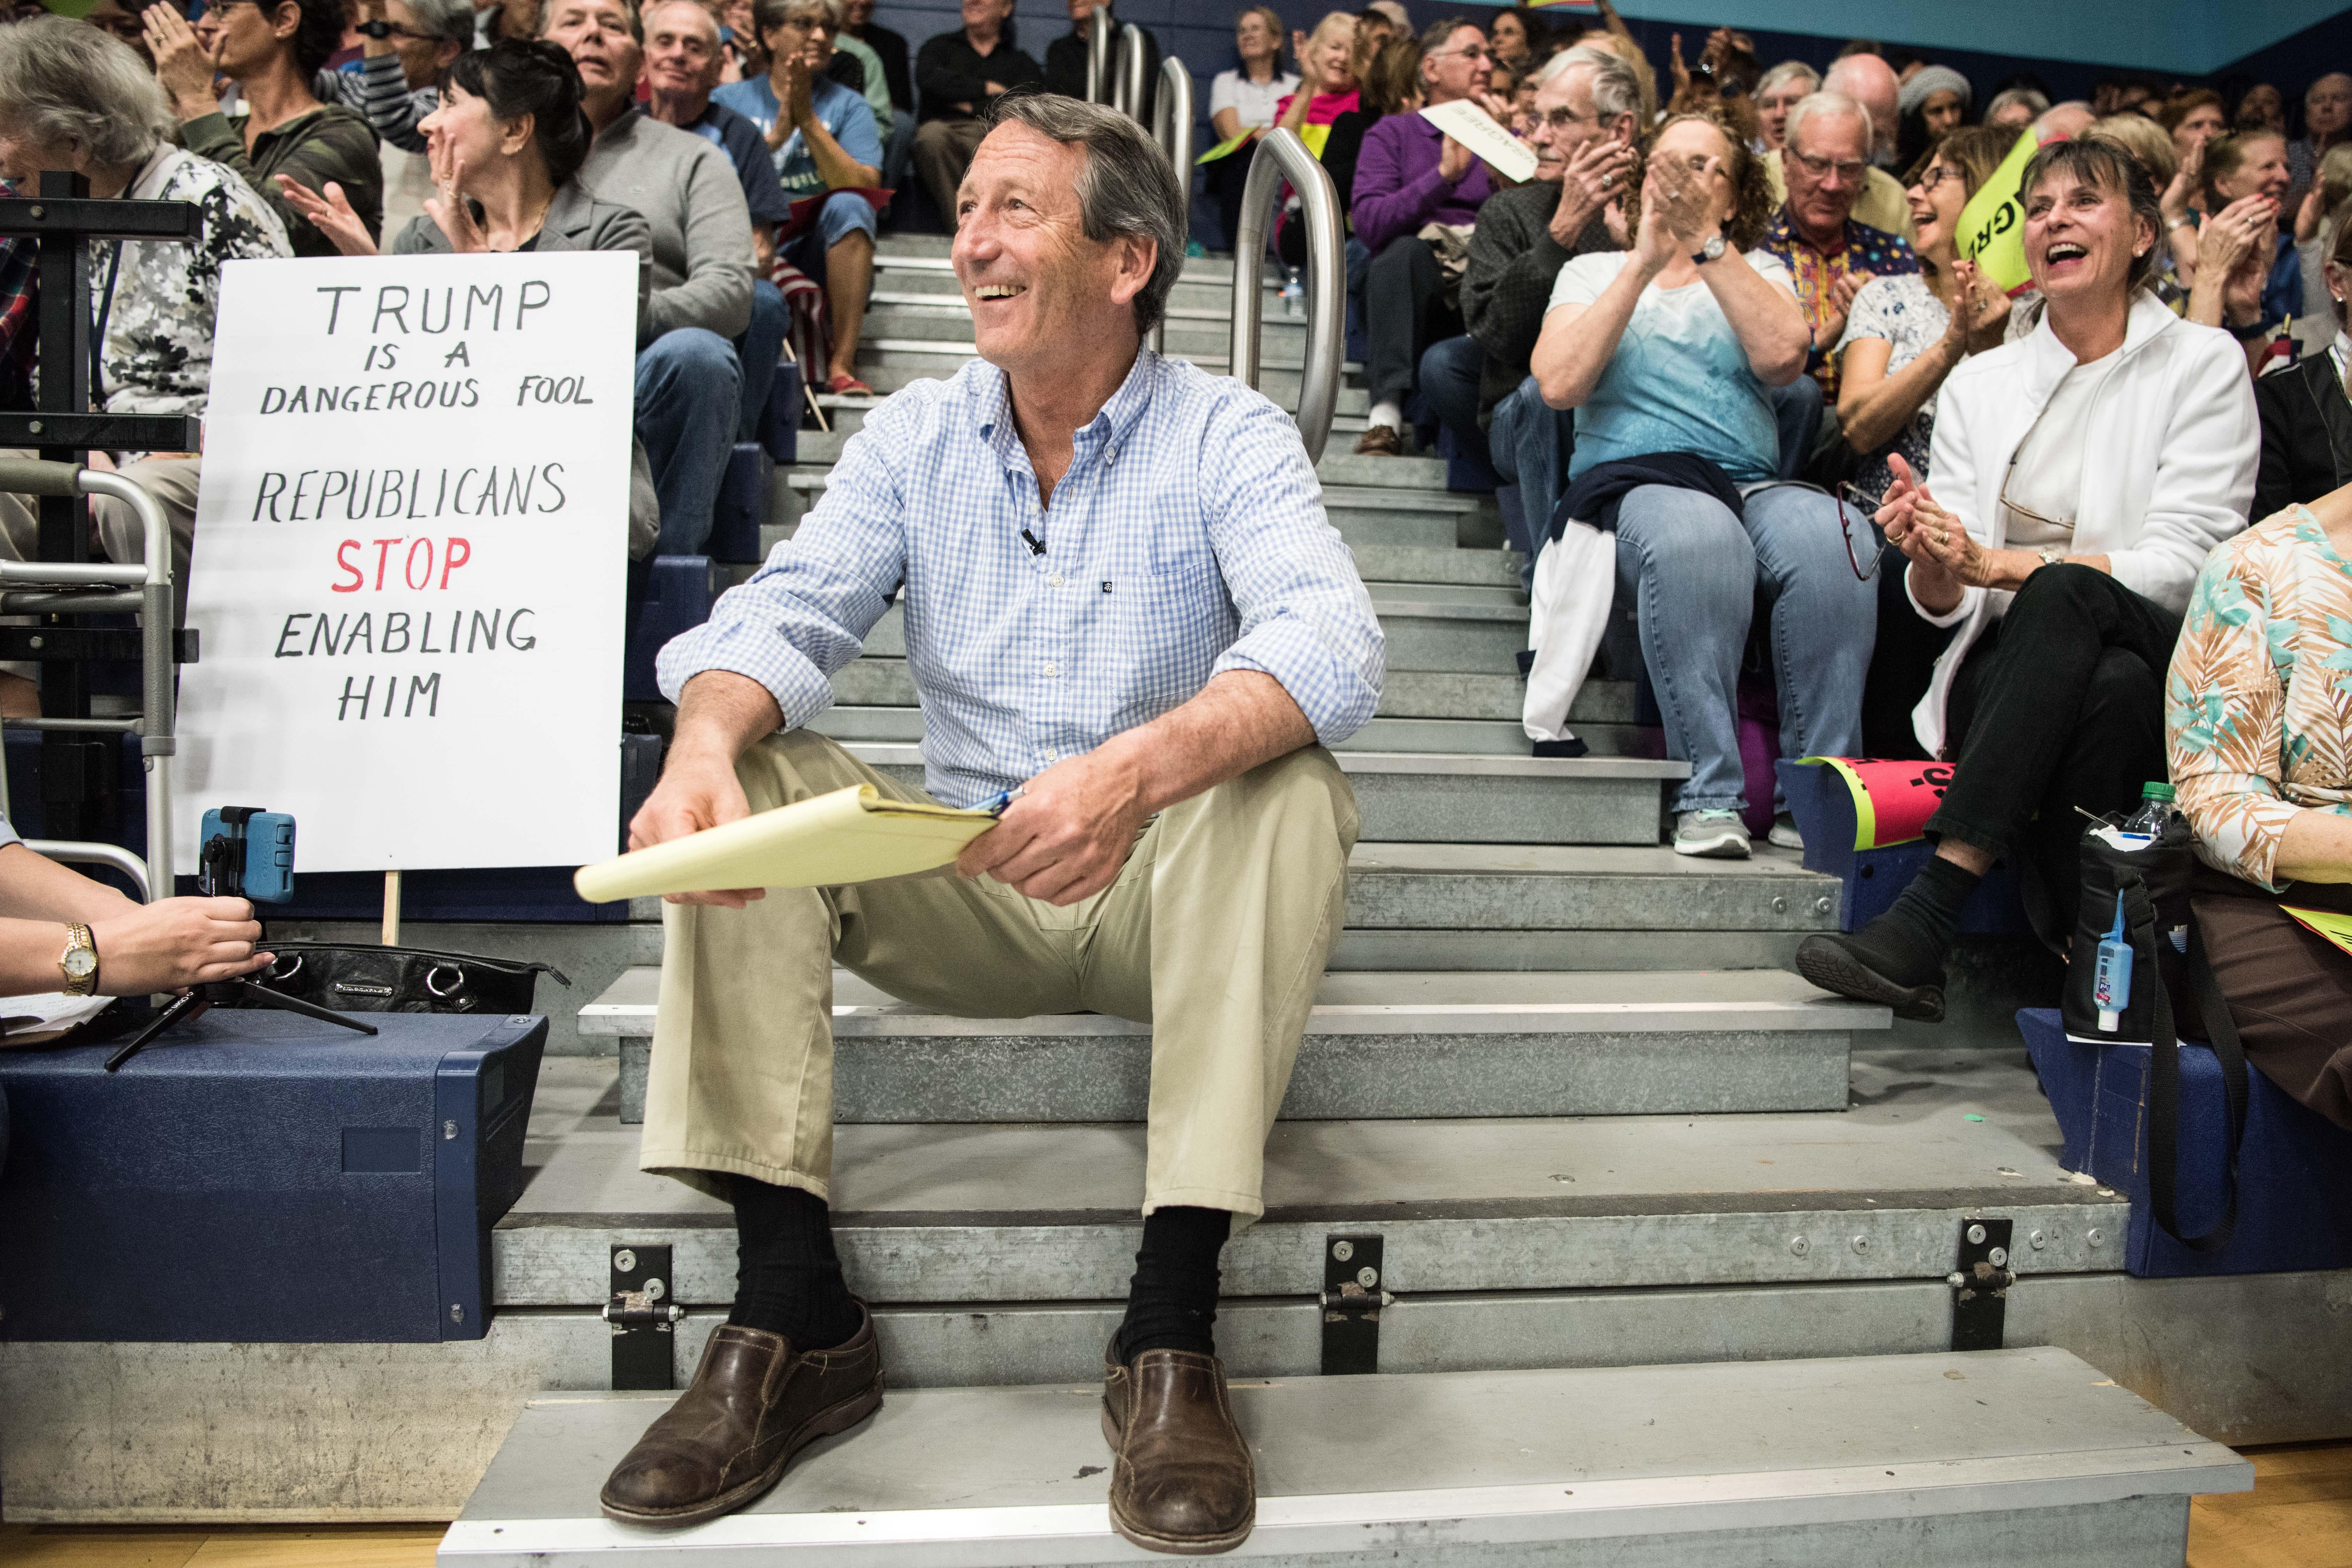 Mark Sanford waits for his introduction during a town hall meeting March 18, 2017 in Hilton Head, South Carolina.